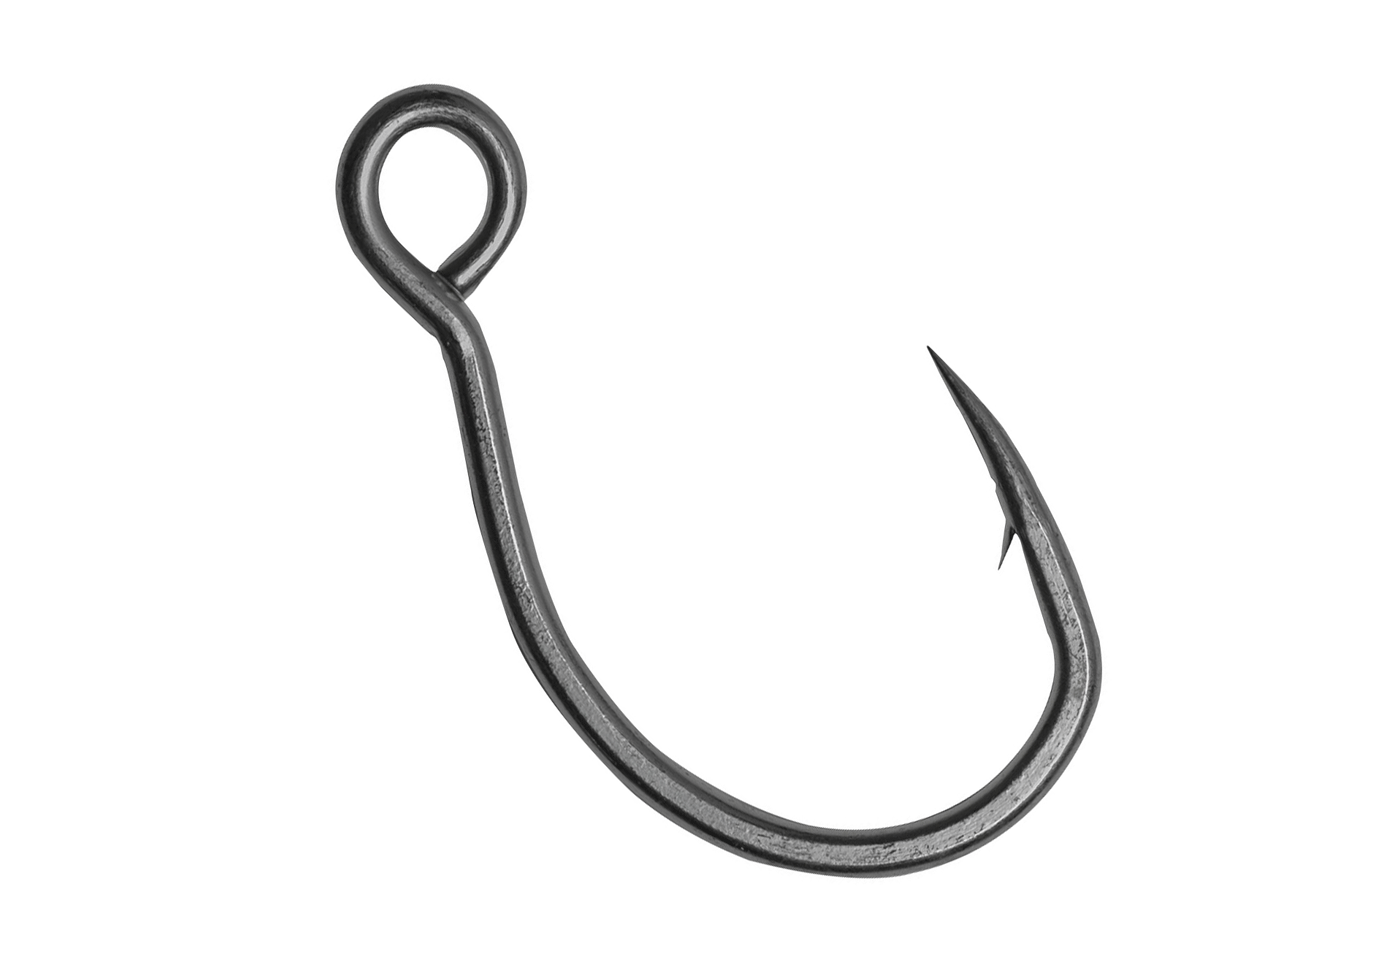 Owner 4102 Single Replacement Hook XXX-Strong Size 9/0 Jagged Tooth Tackle